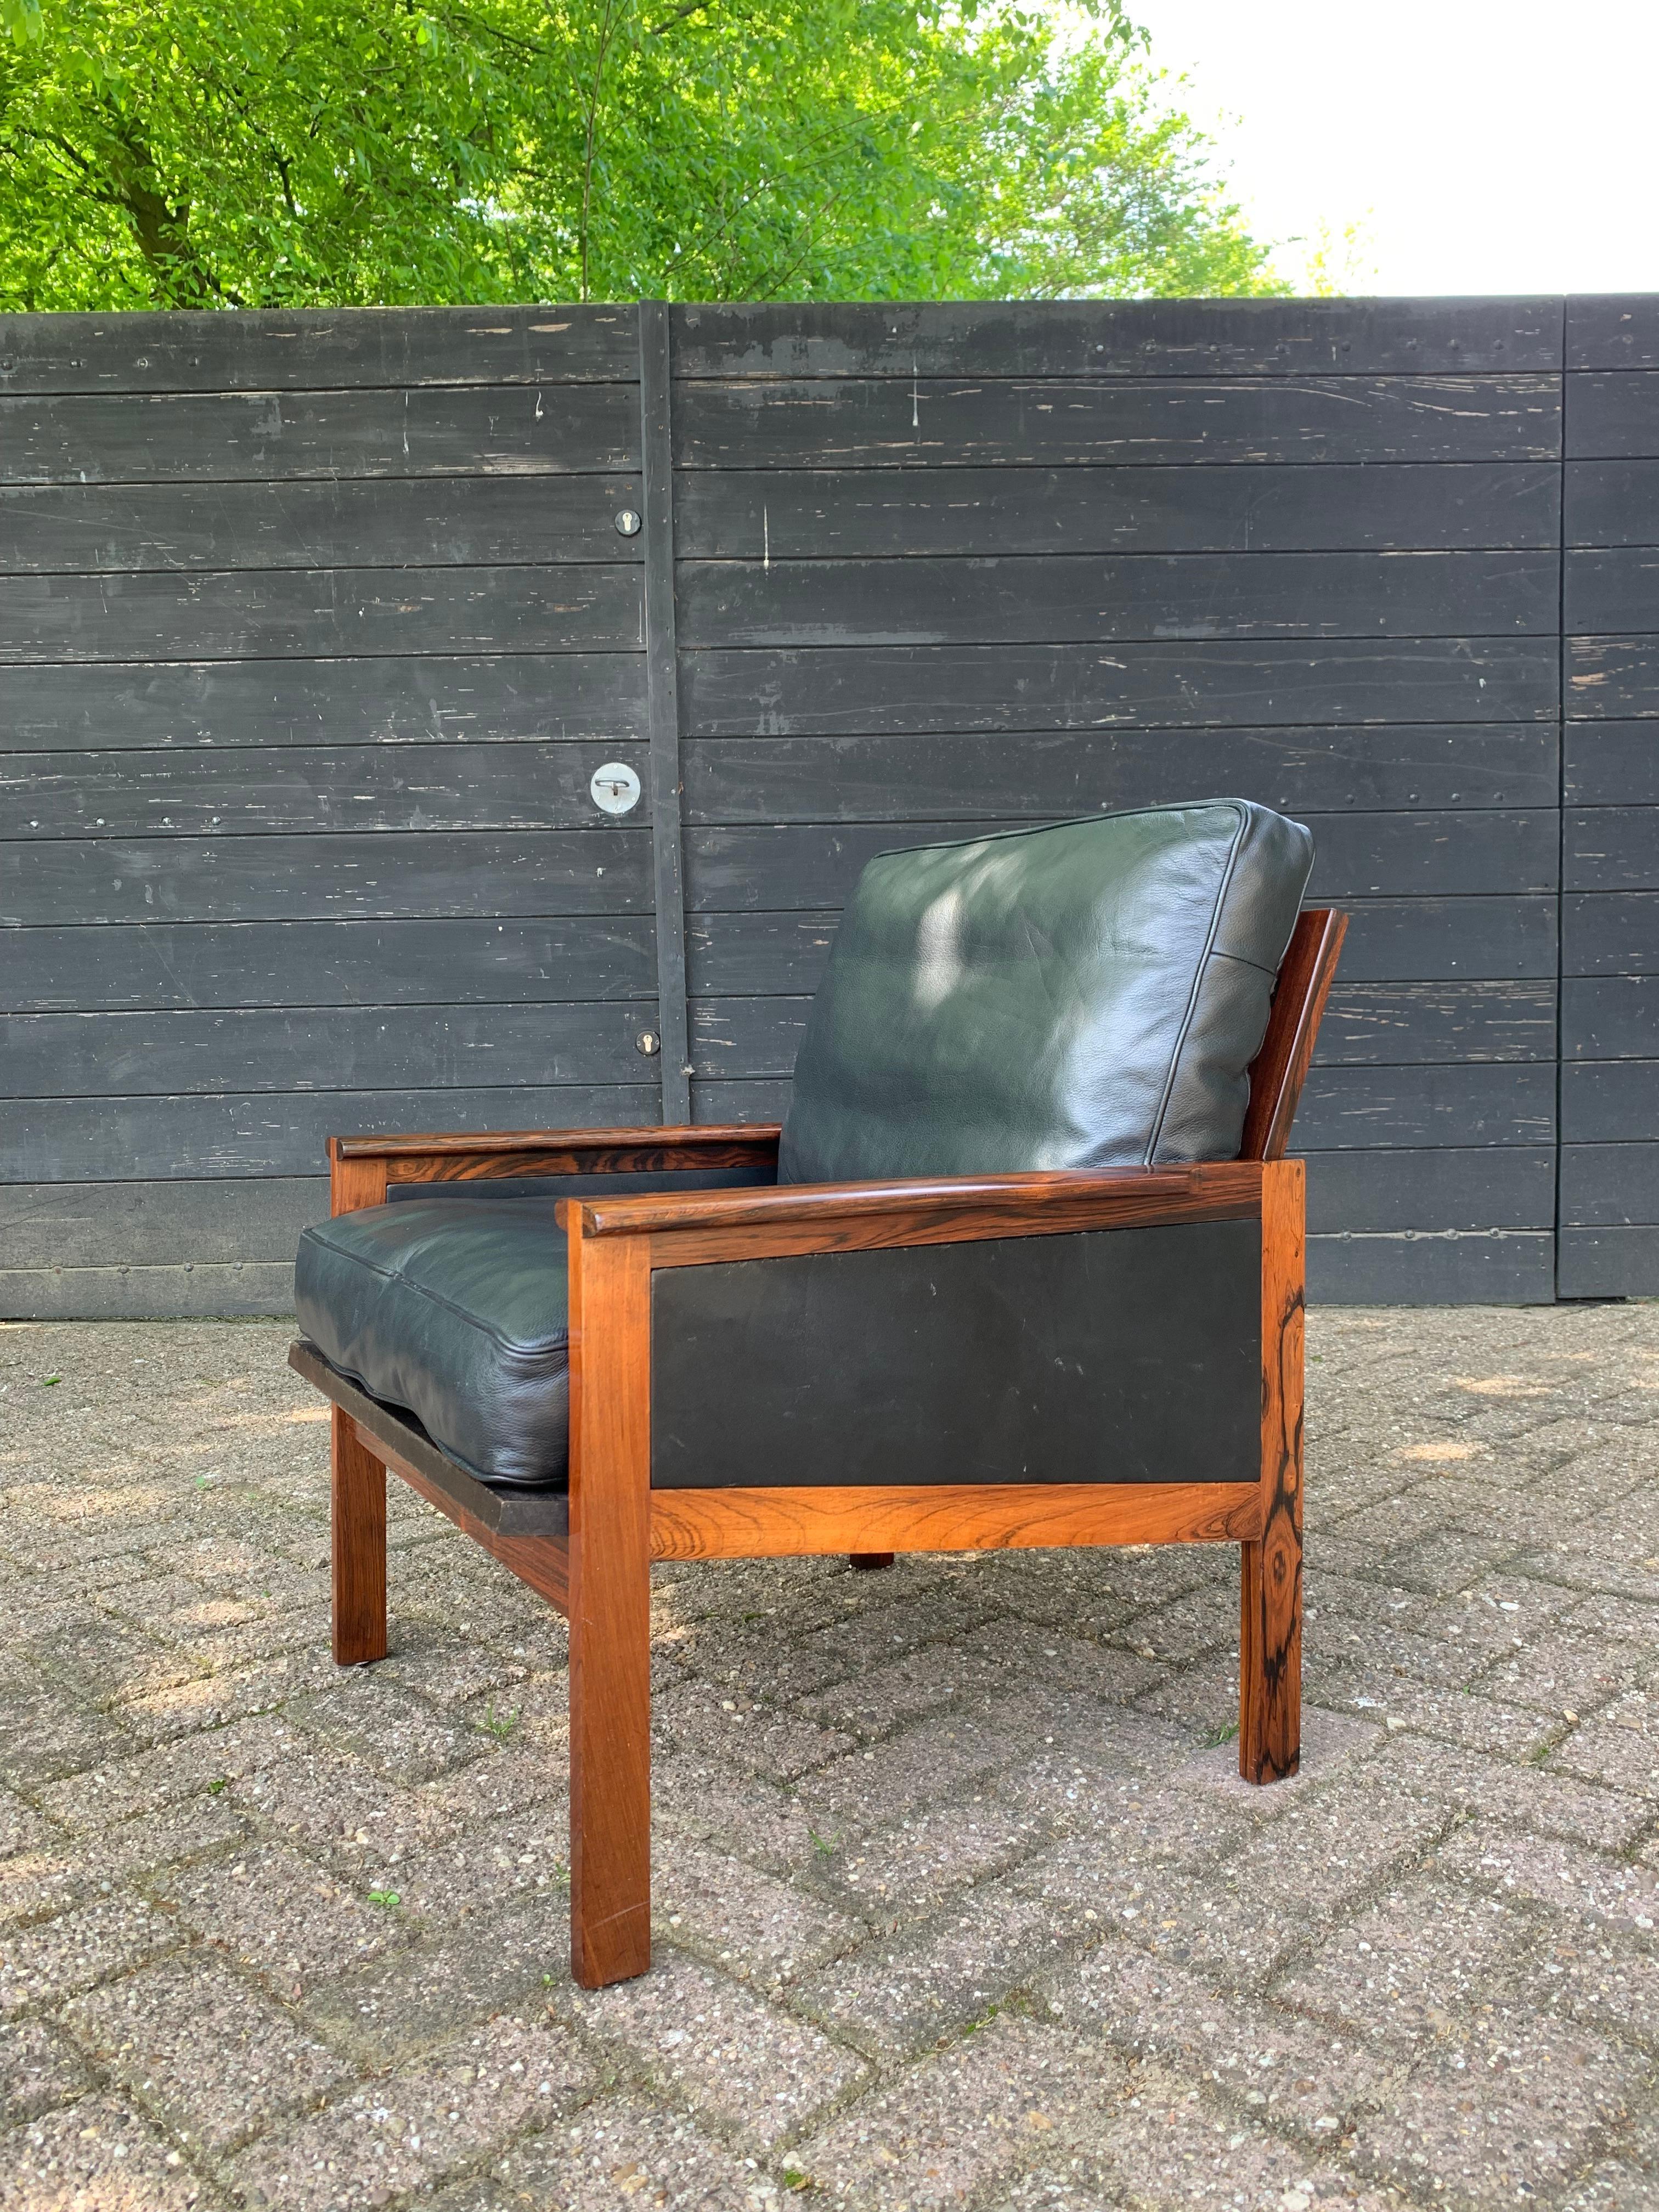 Arm chair model 4 from the Capella Series designed in 1958 by Danish designer Illum Wikkelsø executed in beautiful Rosewood with black leather loose cushions. Made by Danish manufacturer Niels Eilersen. 

Wikkelsø's background in cabinetry instilled